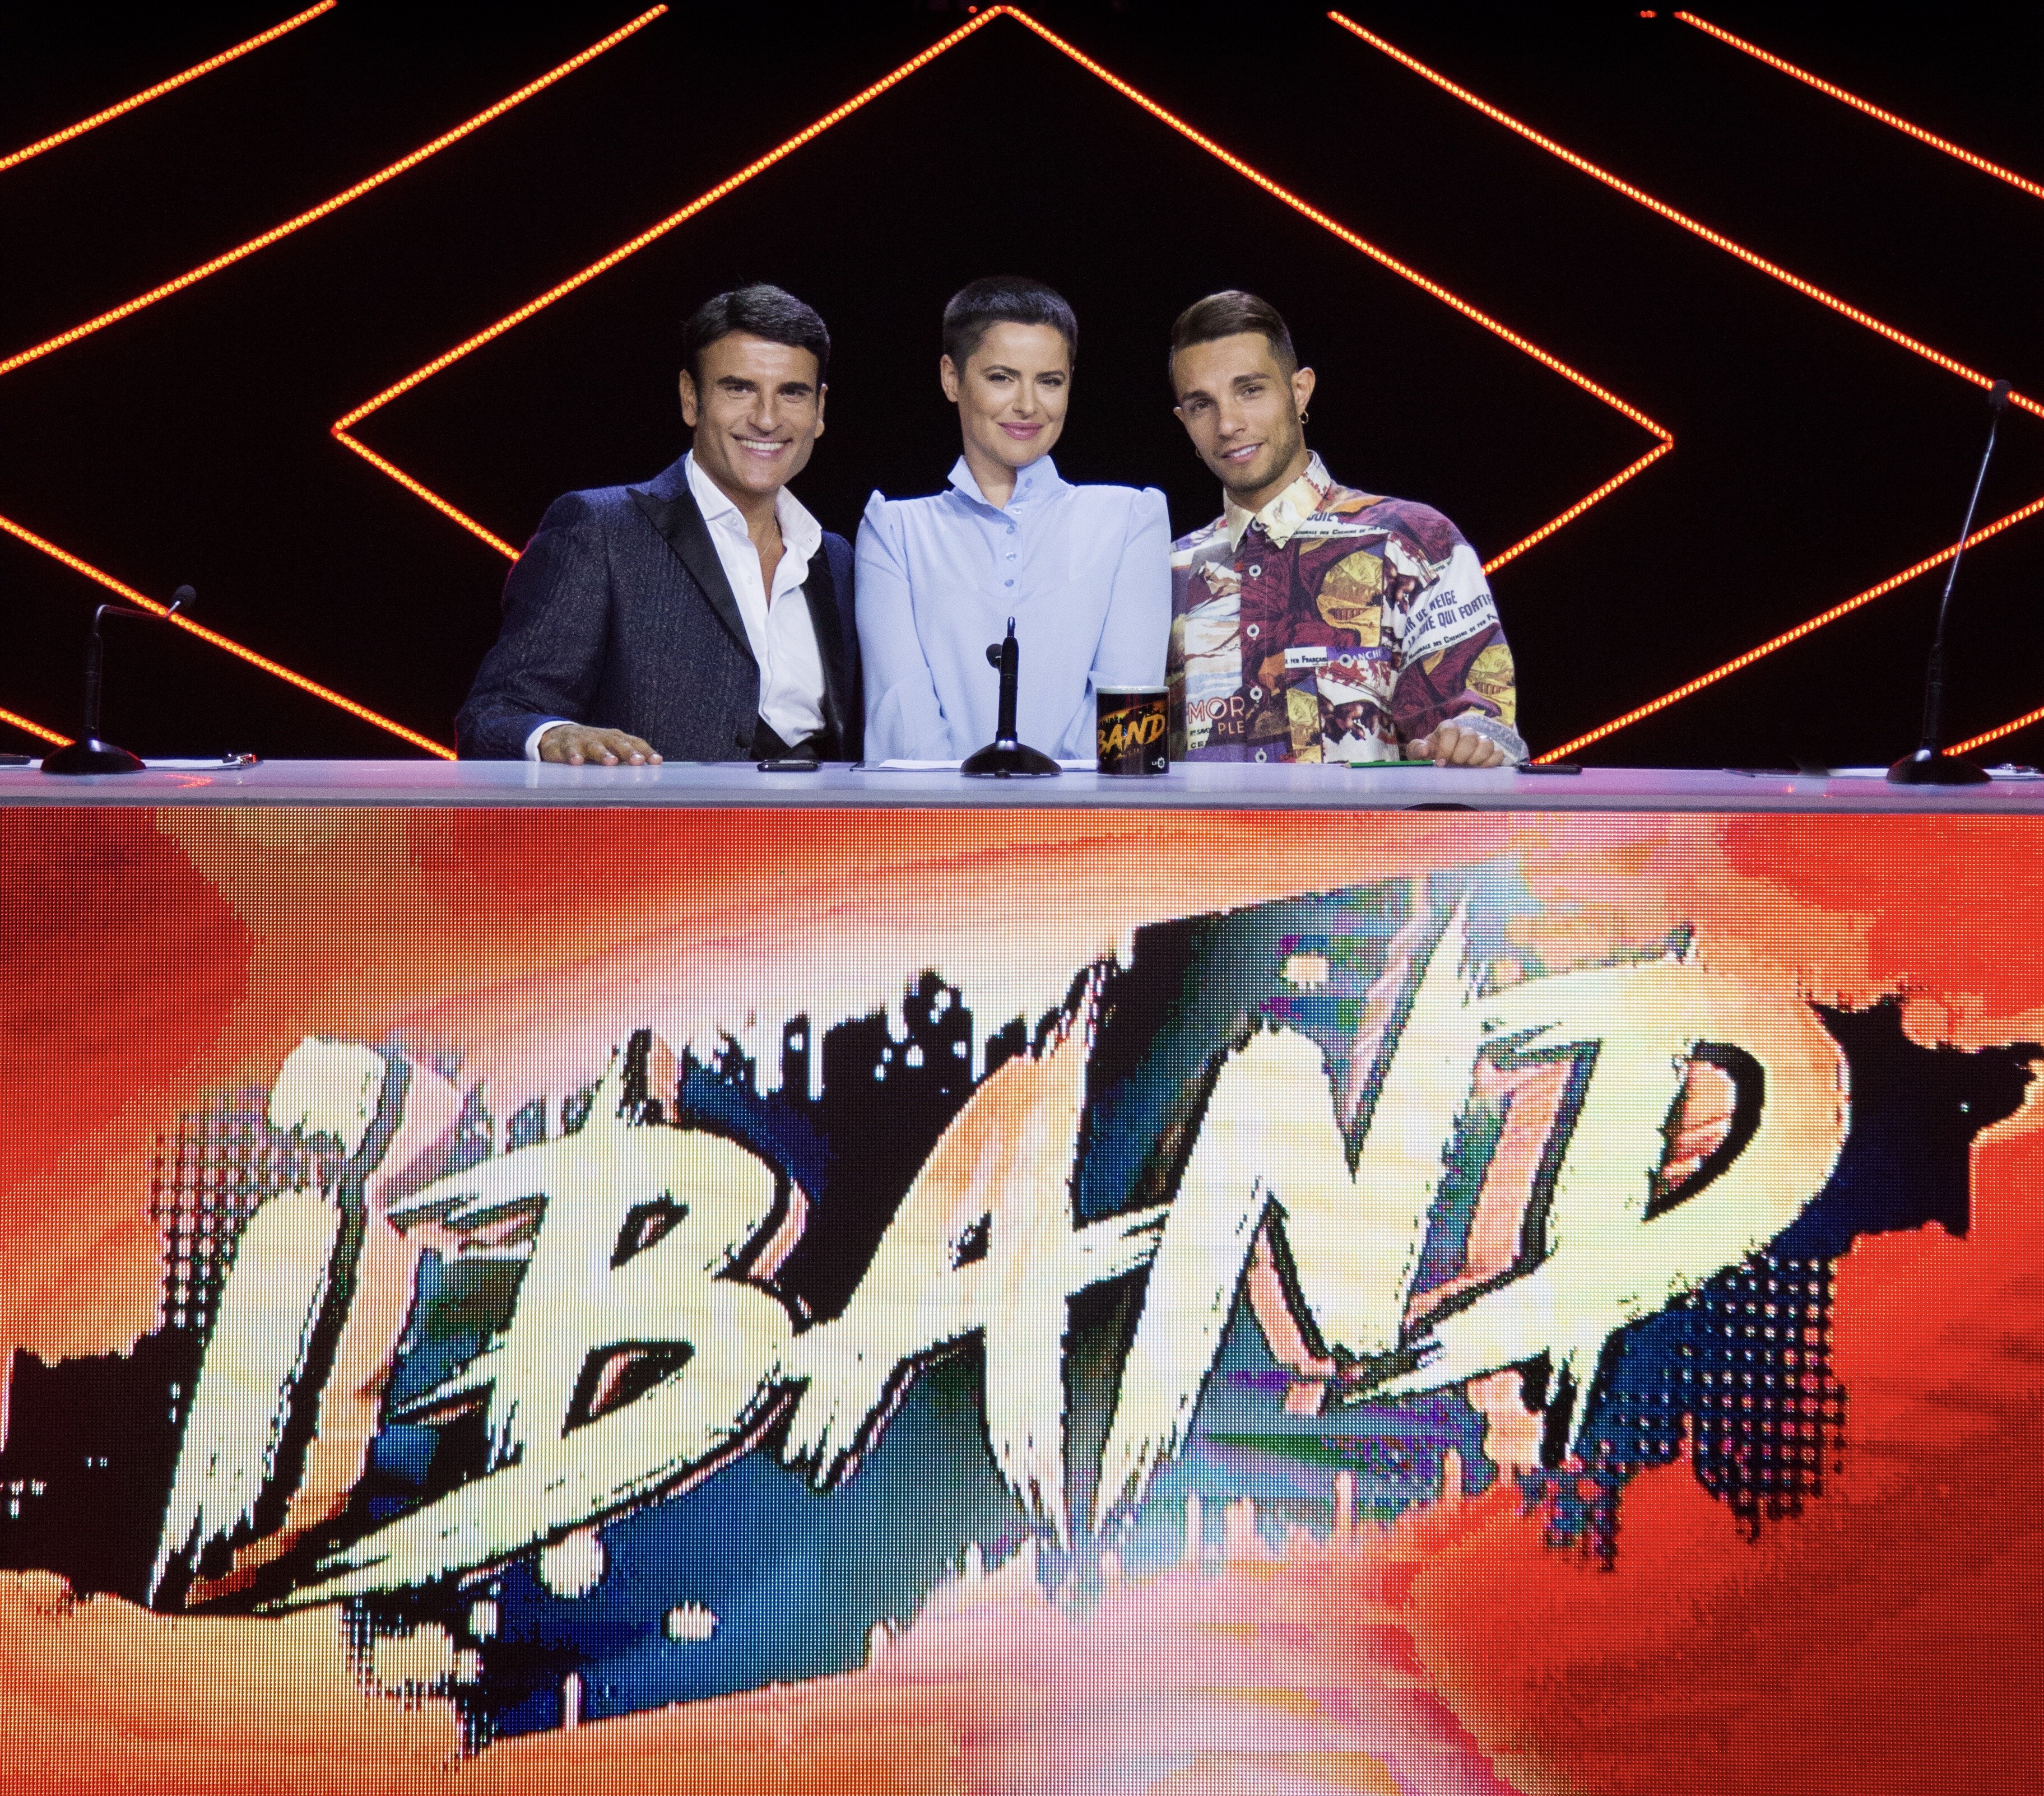 iband